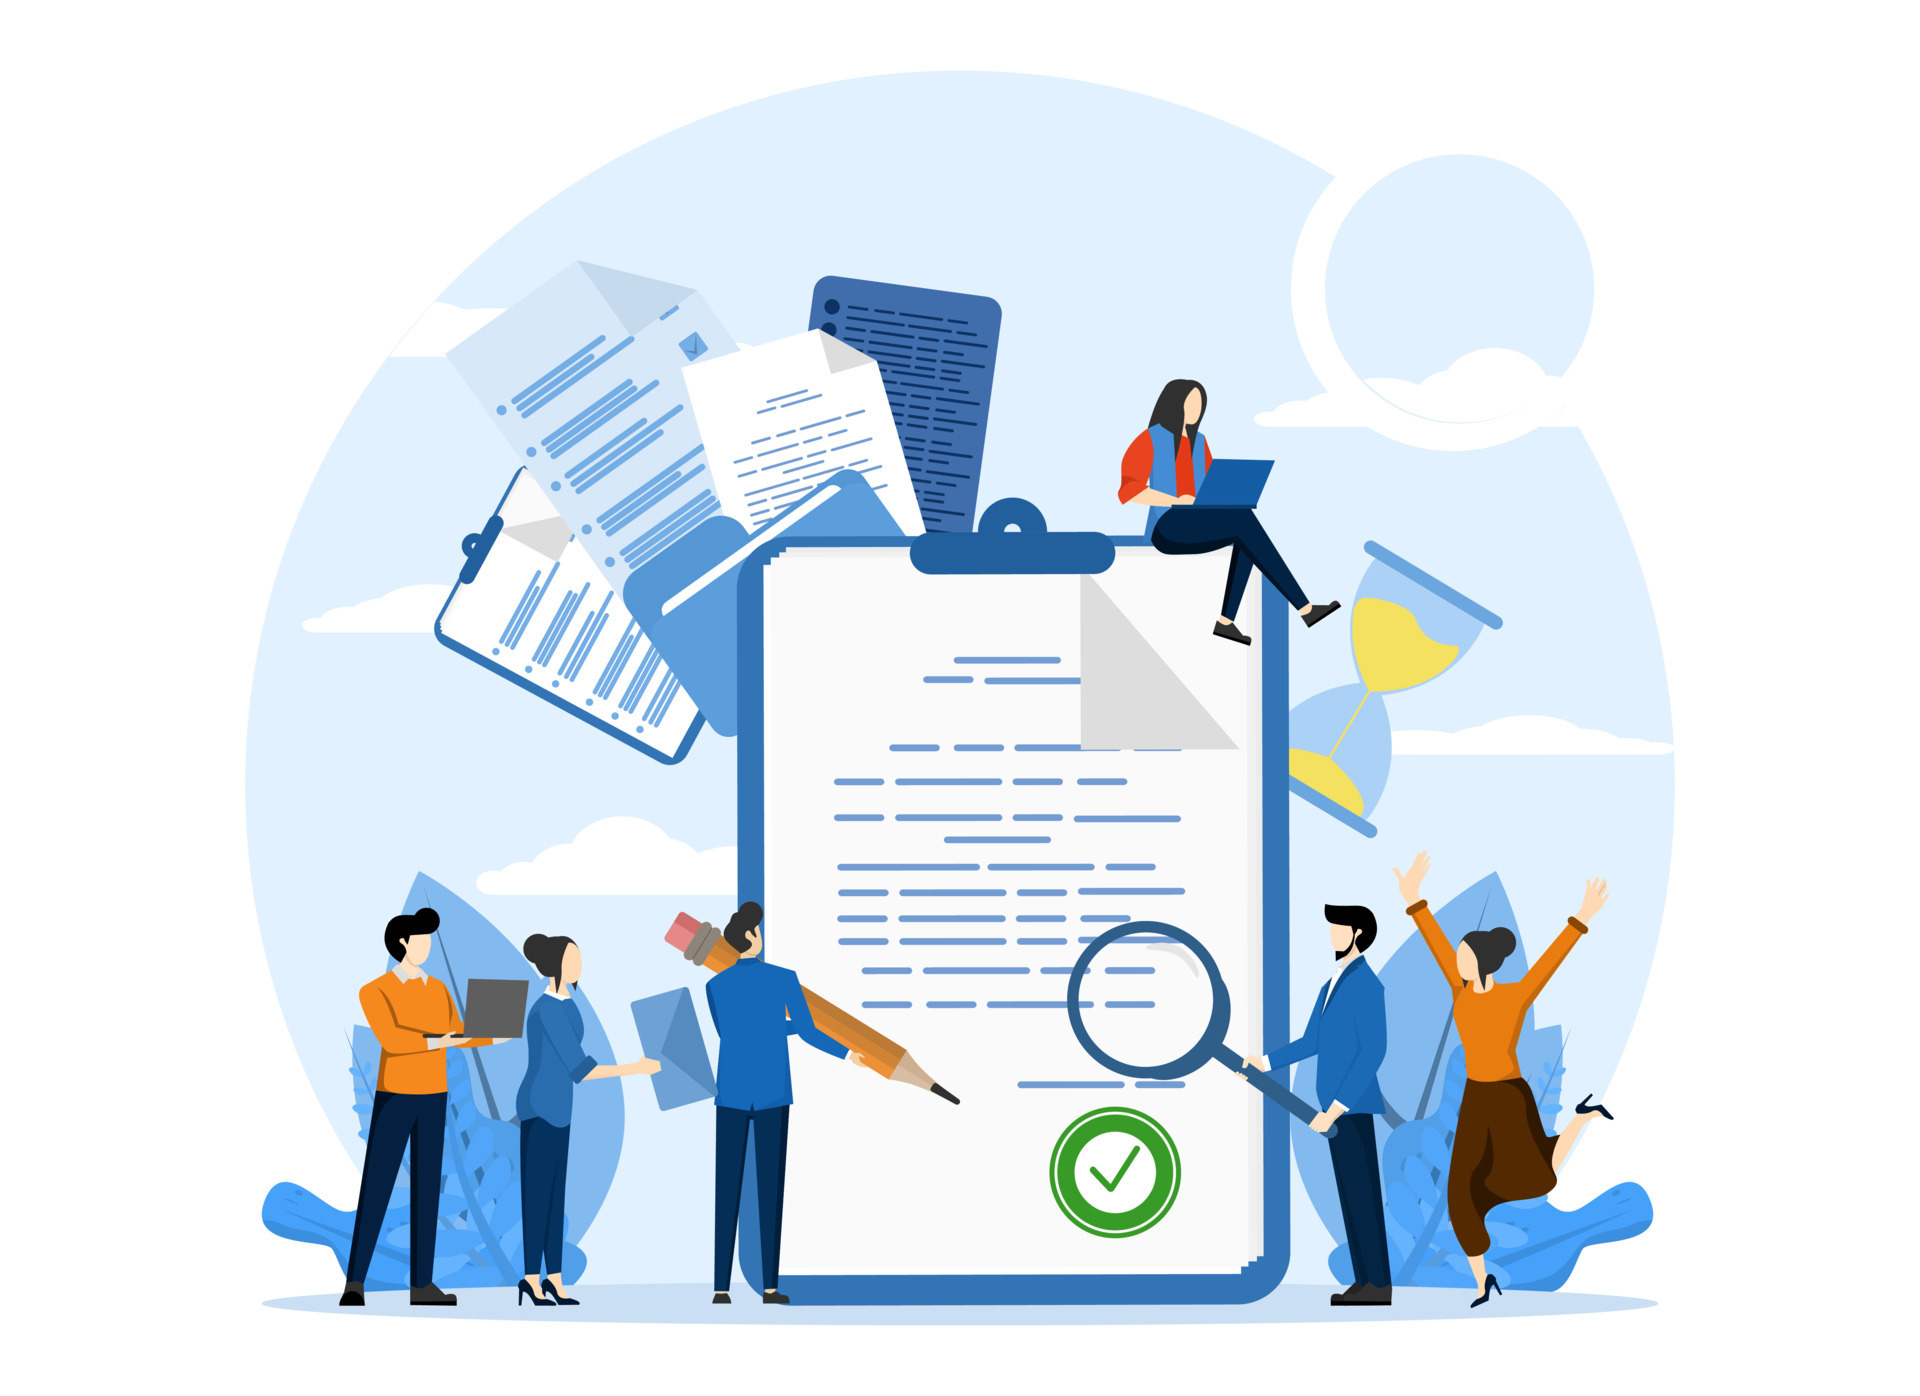 business team with approved documents project completed work done or done test option approved document checked illustration concept for web page banner social media vector